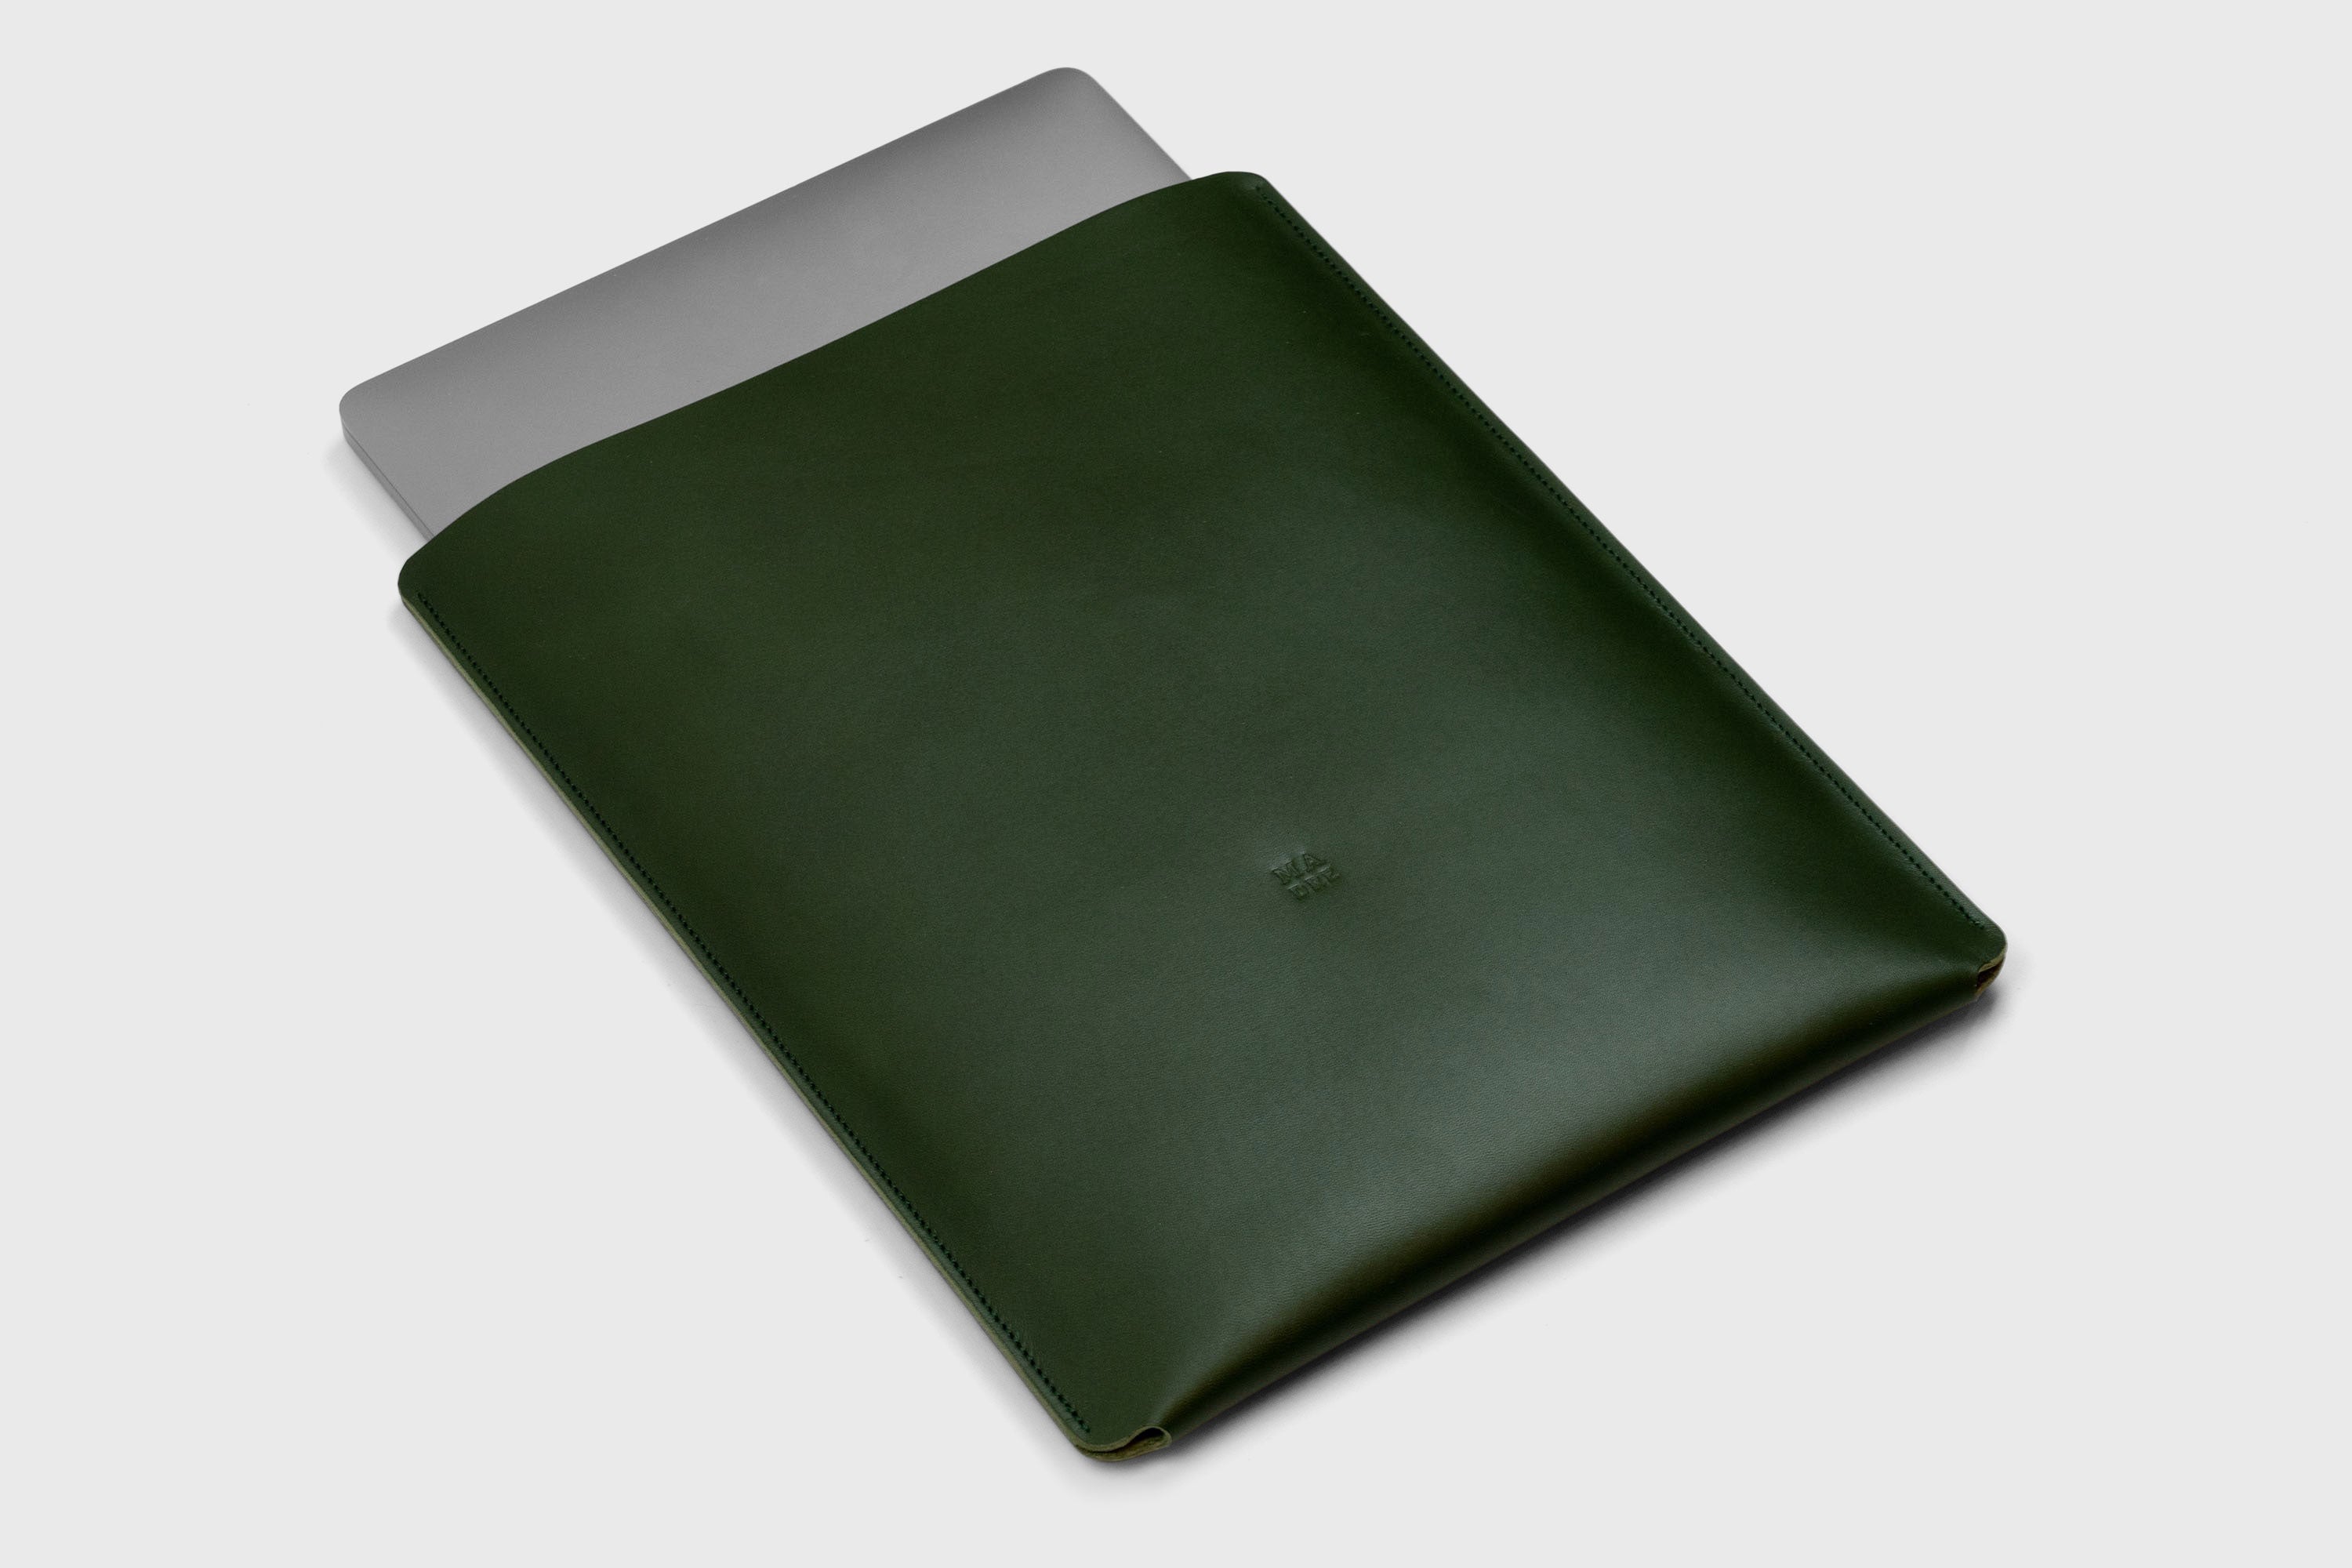 MacBook Air 15 Inch Sleeve Leather Olive Green Colour Minimalistic Design Premium Quality By Atelier Madre Manuel Dreesmann Atelier Madre Barcelona Spain